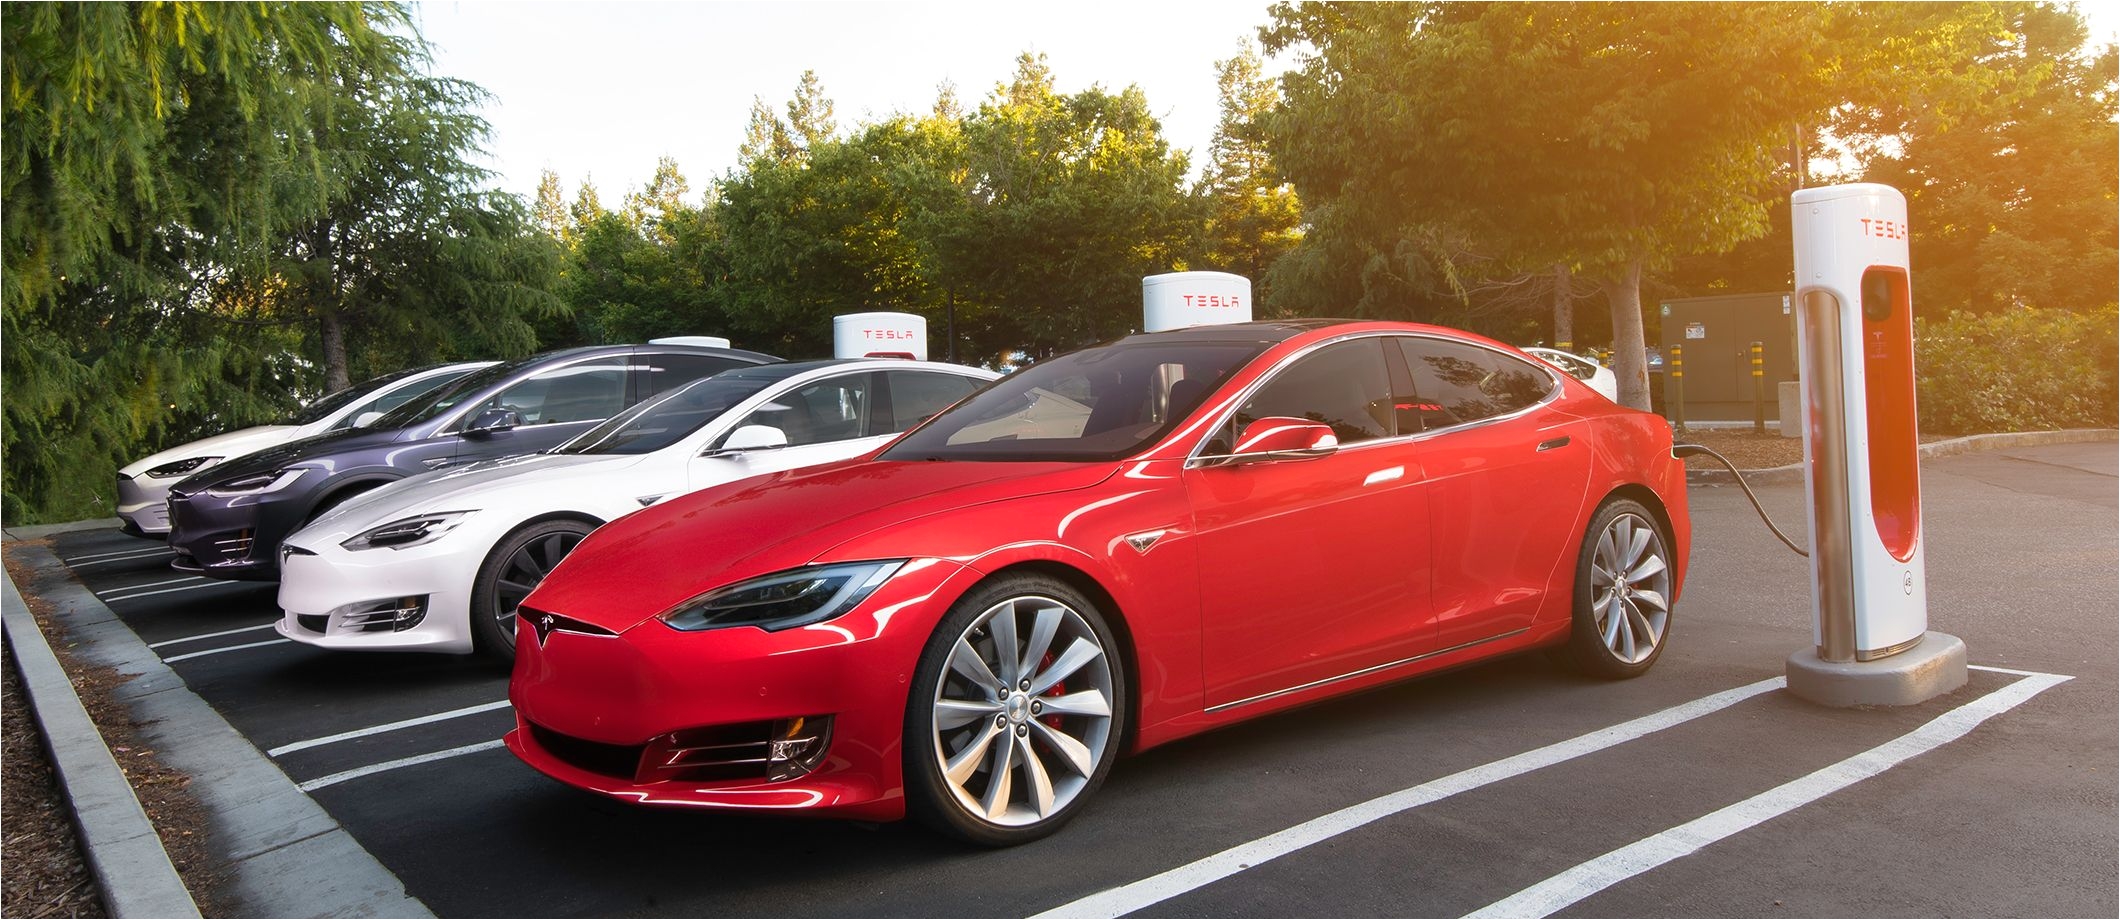 for the most part new tesla owners will be charged to close market rates per kwh